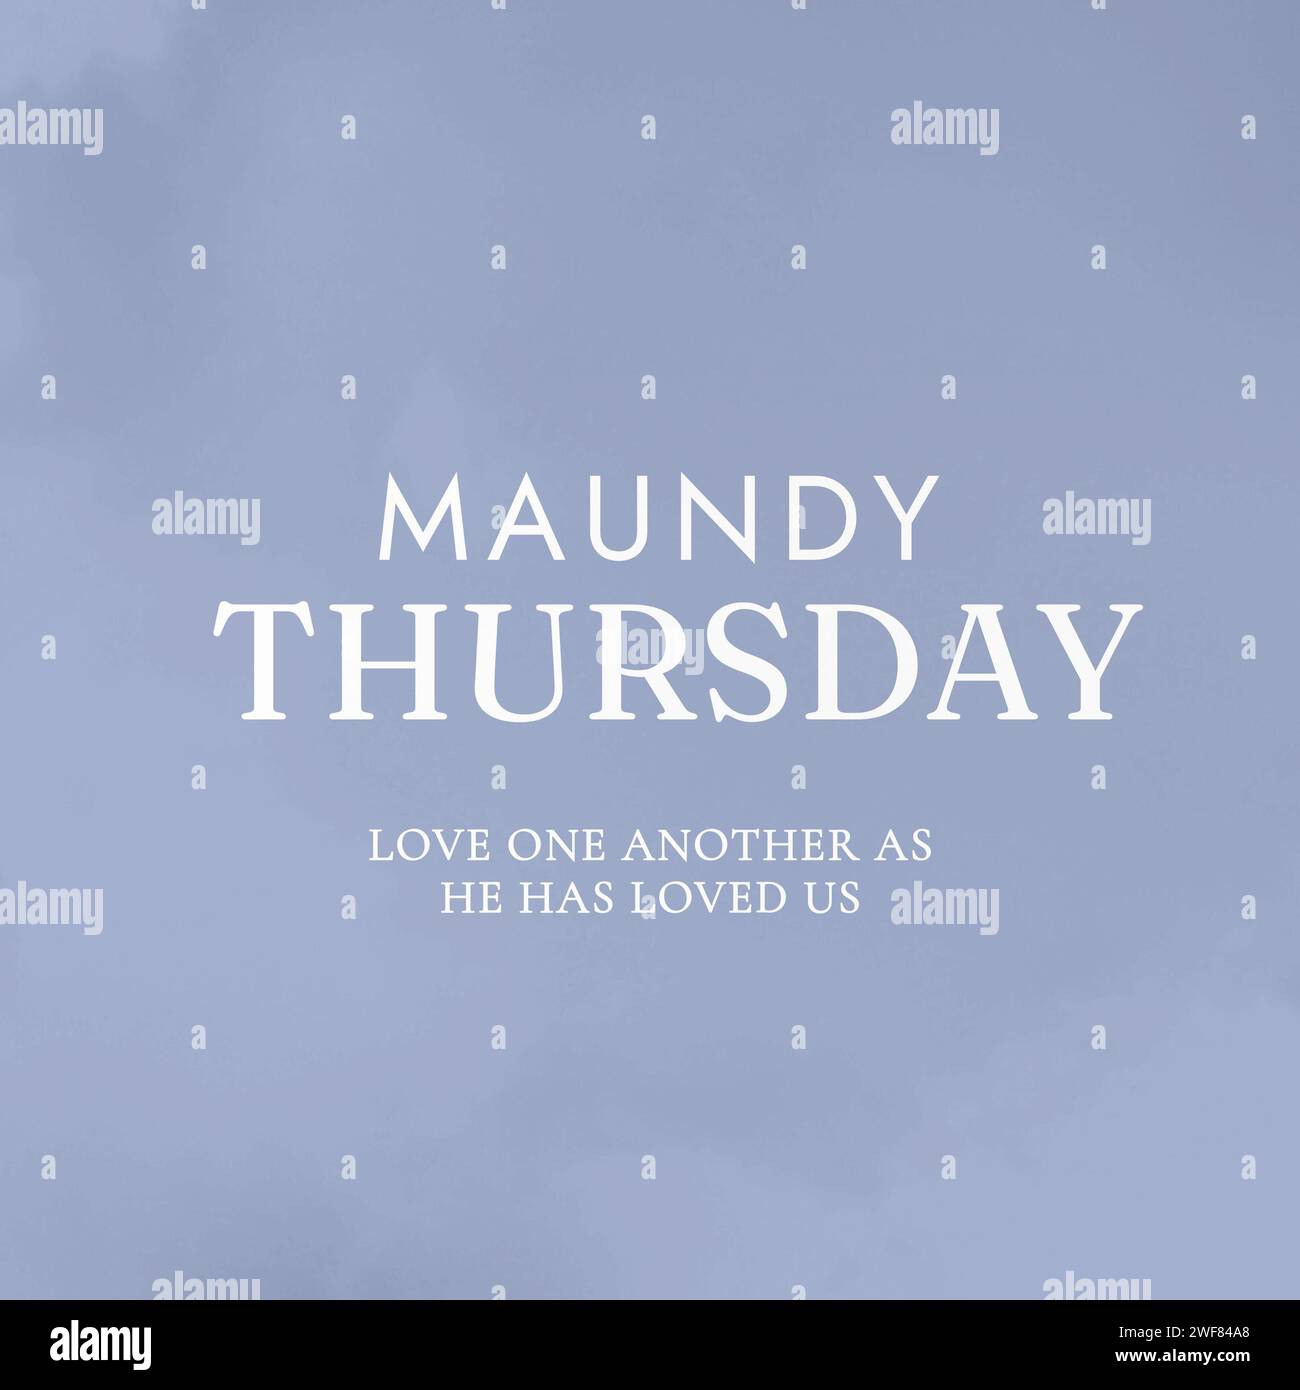 Composition of maundy thursday text over sky with clouds Stock Photo